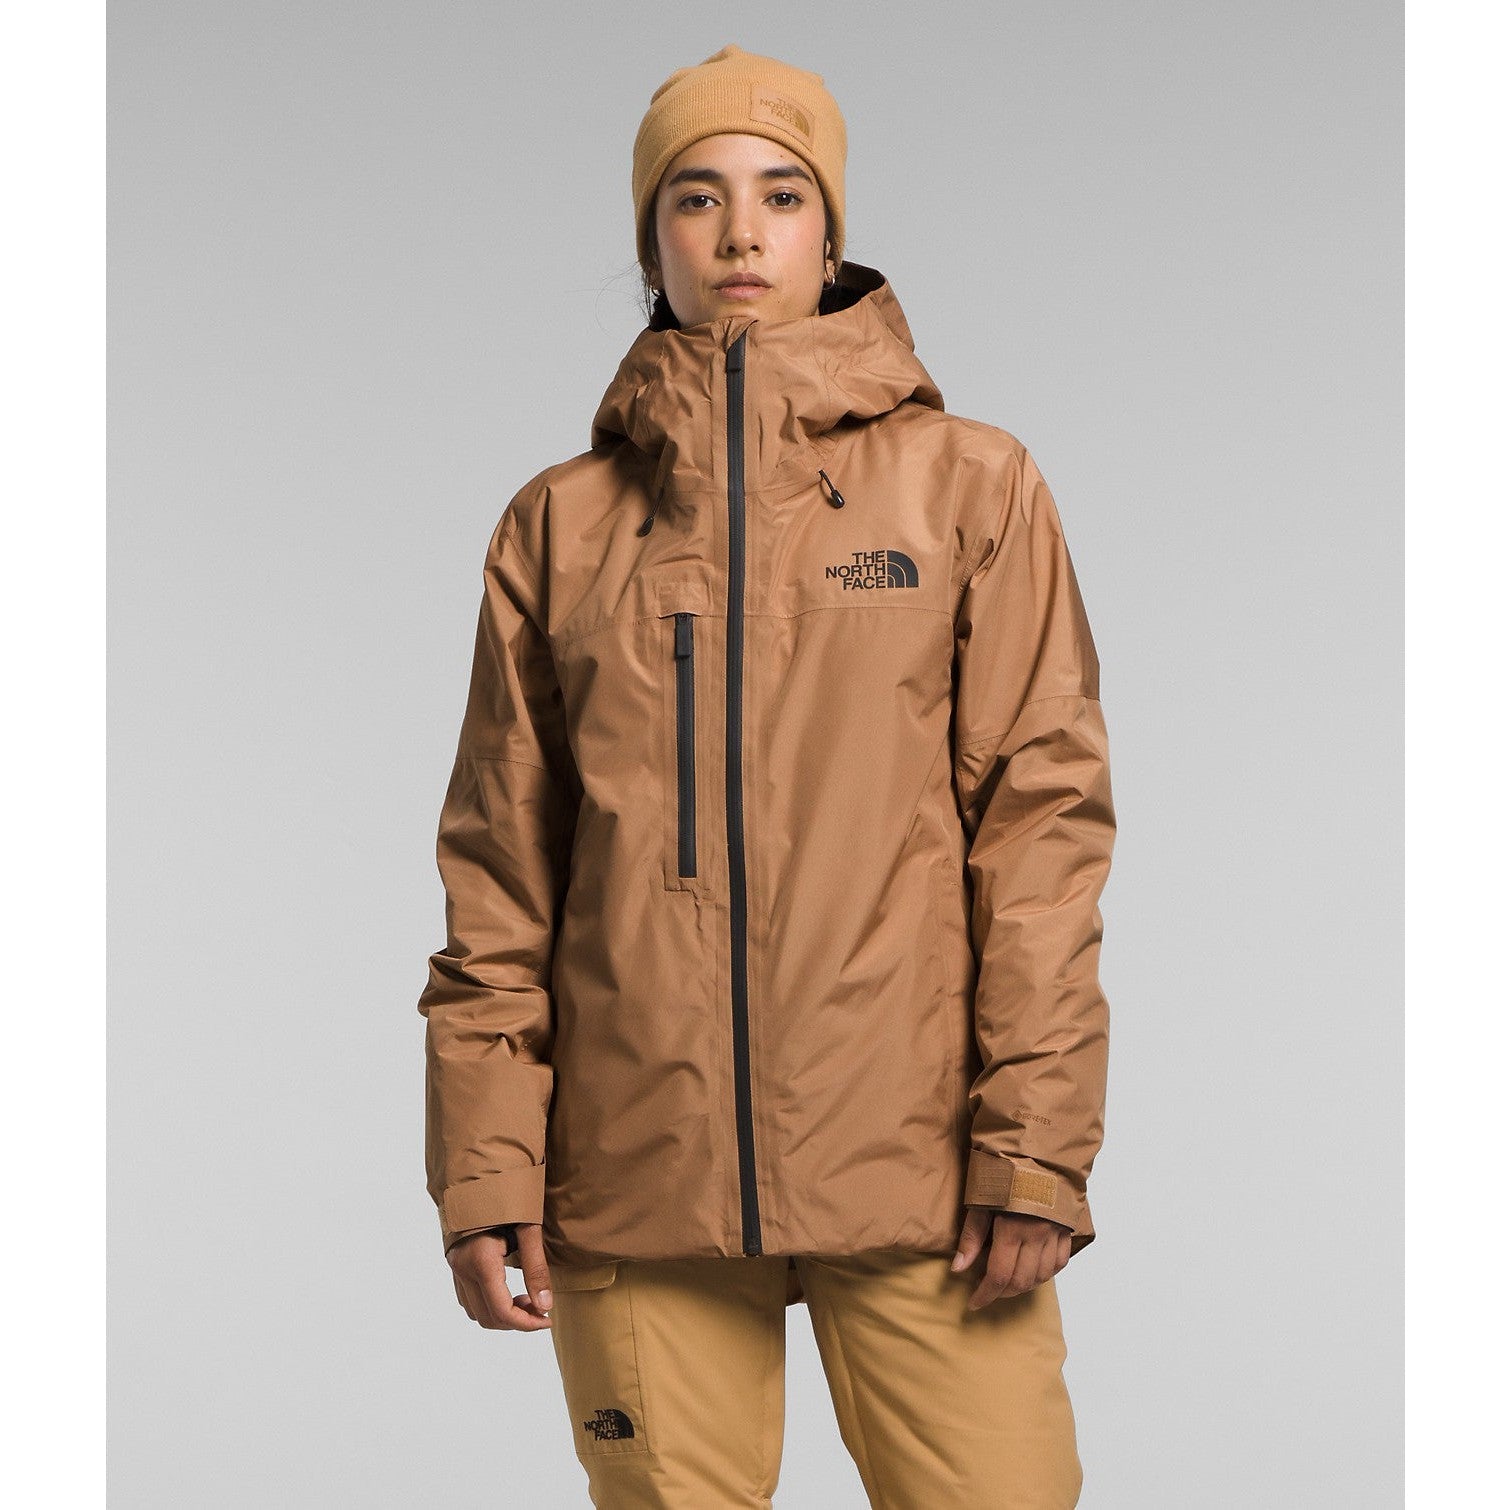 The North Face ThermoBall Women's Insulated Jackets